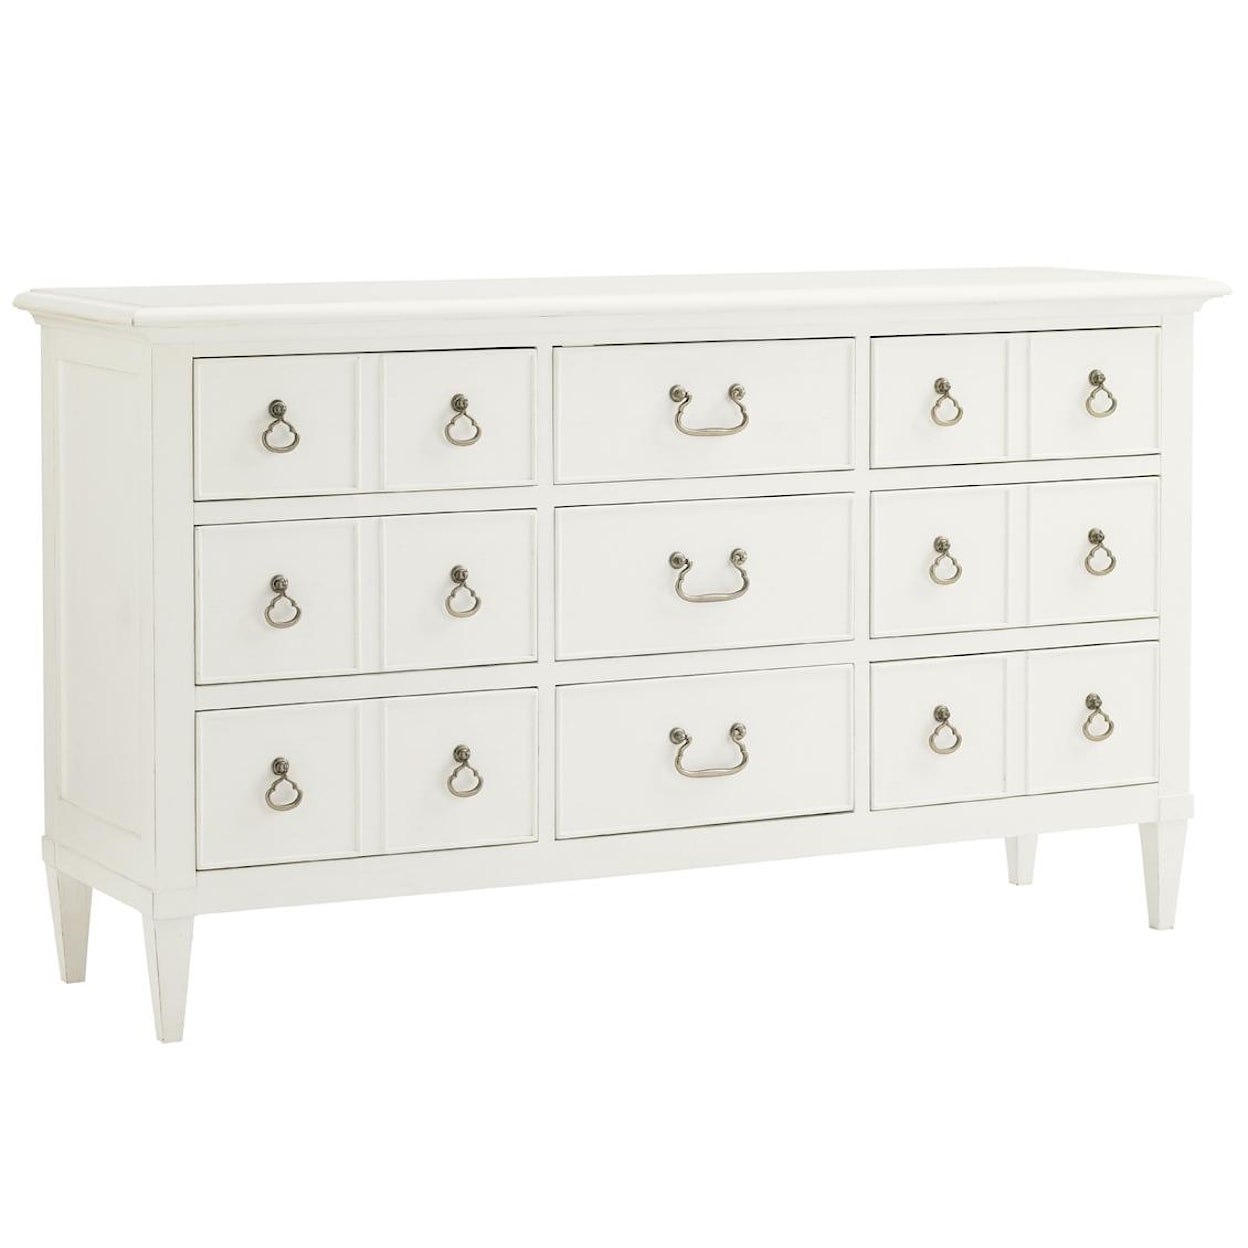 Tommy Bahama Home Ivory Key Grotto Isle Dresser & Paget Mirror